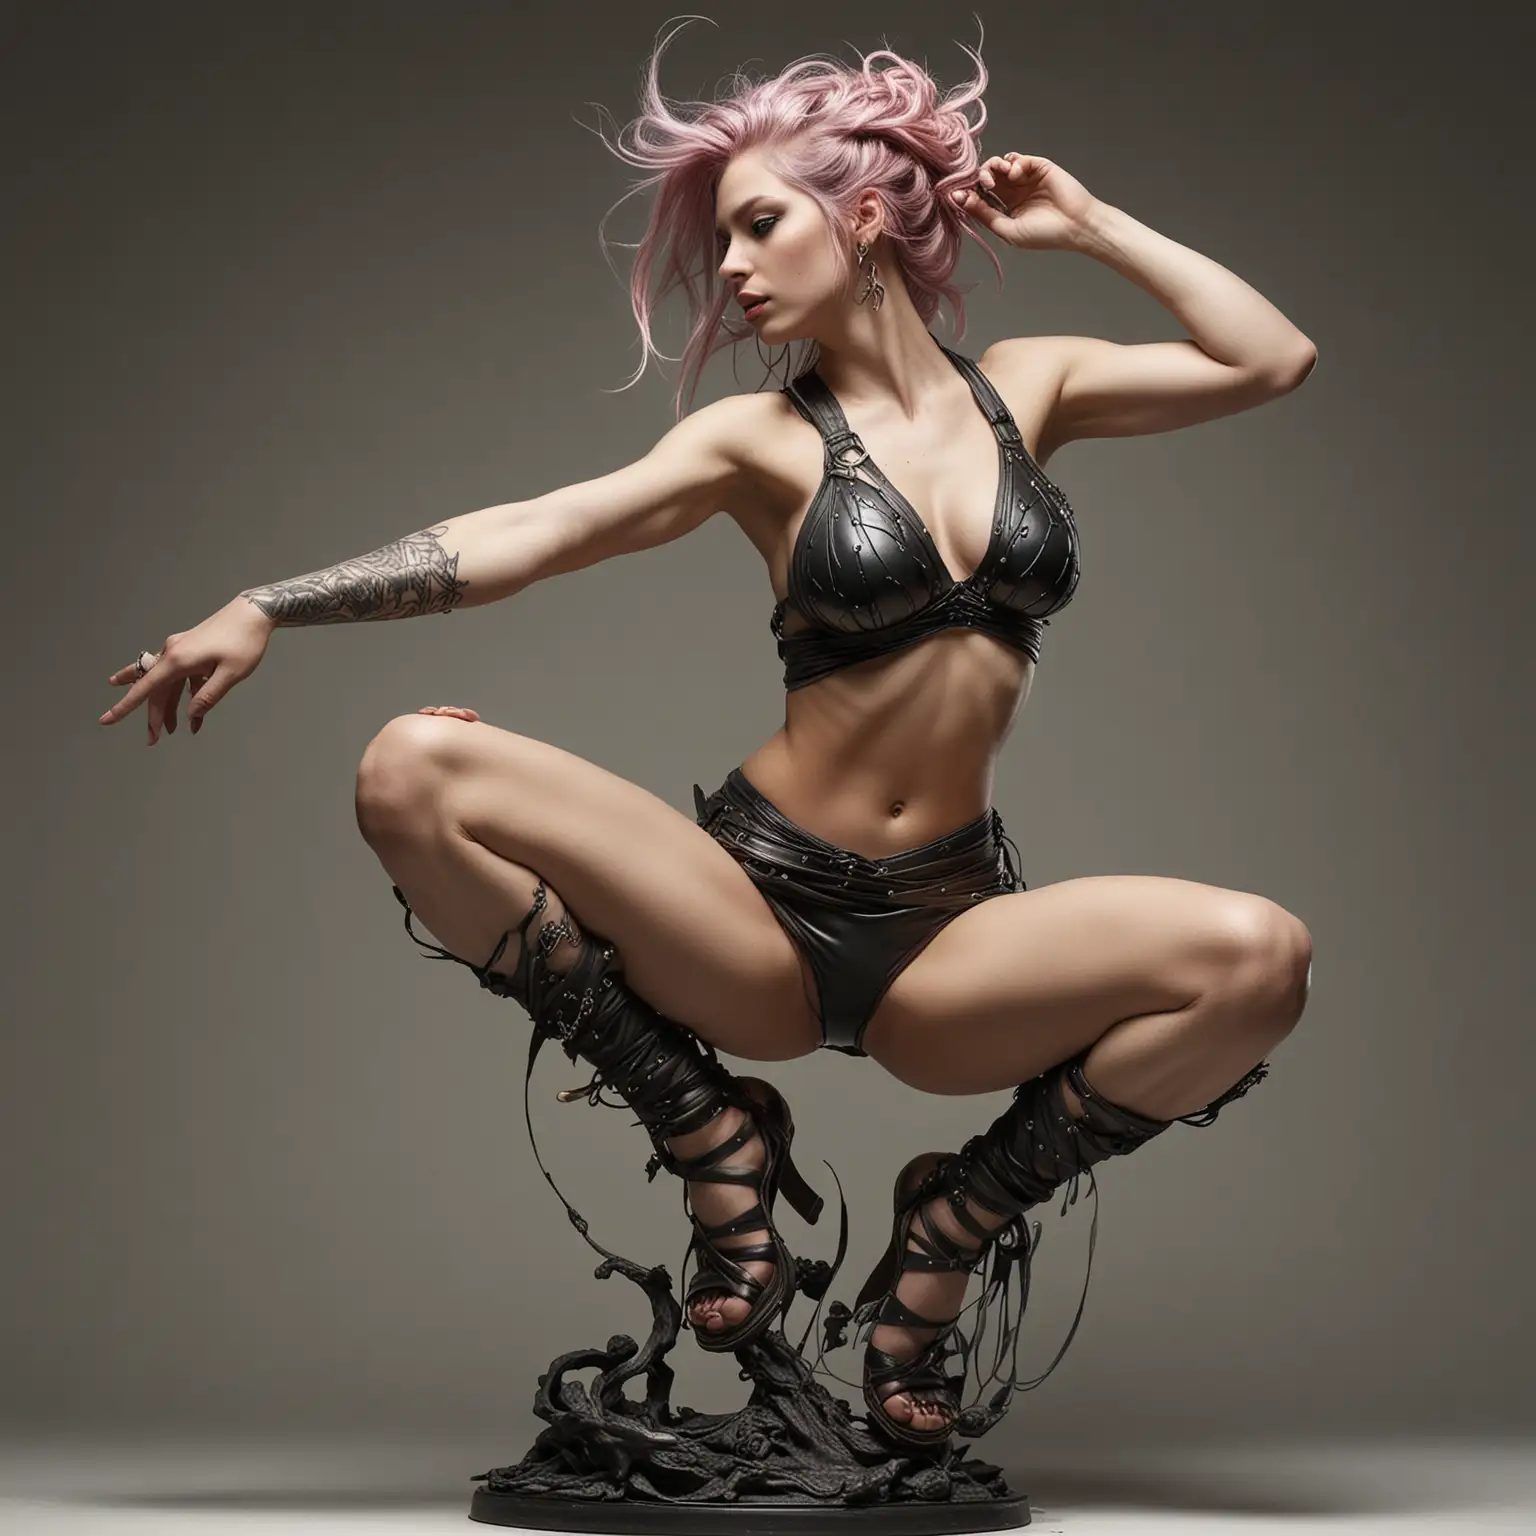 an artistic image shows a Fairypunk in a challenging pose. The Fairypunk's body is curled and twisted in a very soft and tortuous way, highlighting the beauty of the human body and the limits of movement. The overall style is both sculptural and expressive of the ability to capture dynamic forms. This is a popular style of modern portrait and body artwork that emphasizes line, shape, and contrasts of light and shadow by Seven Samurai art